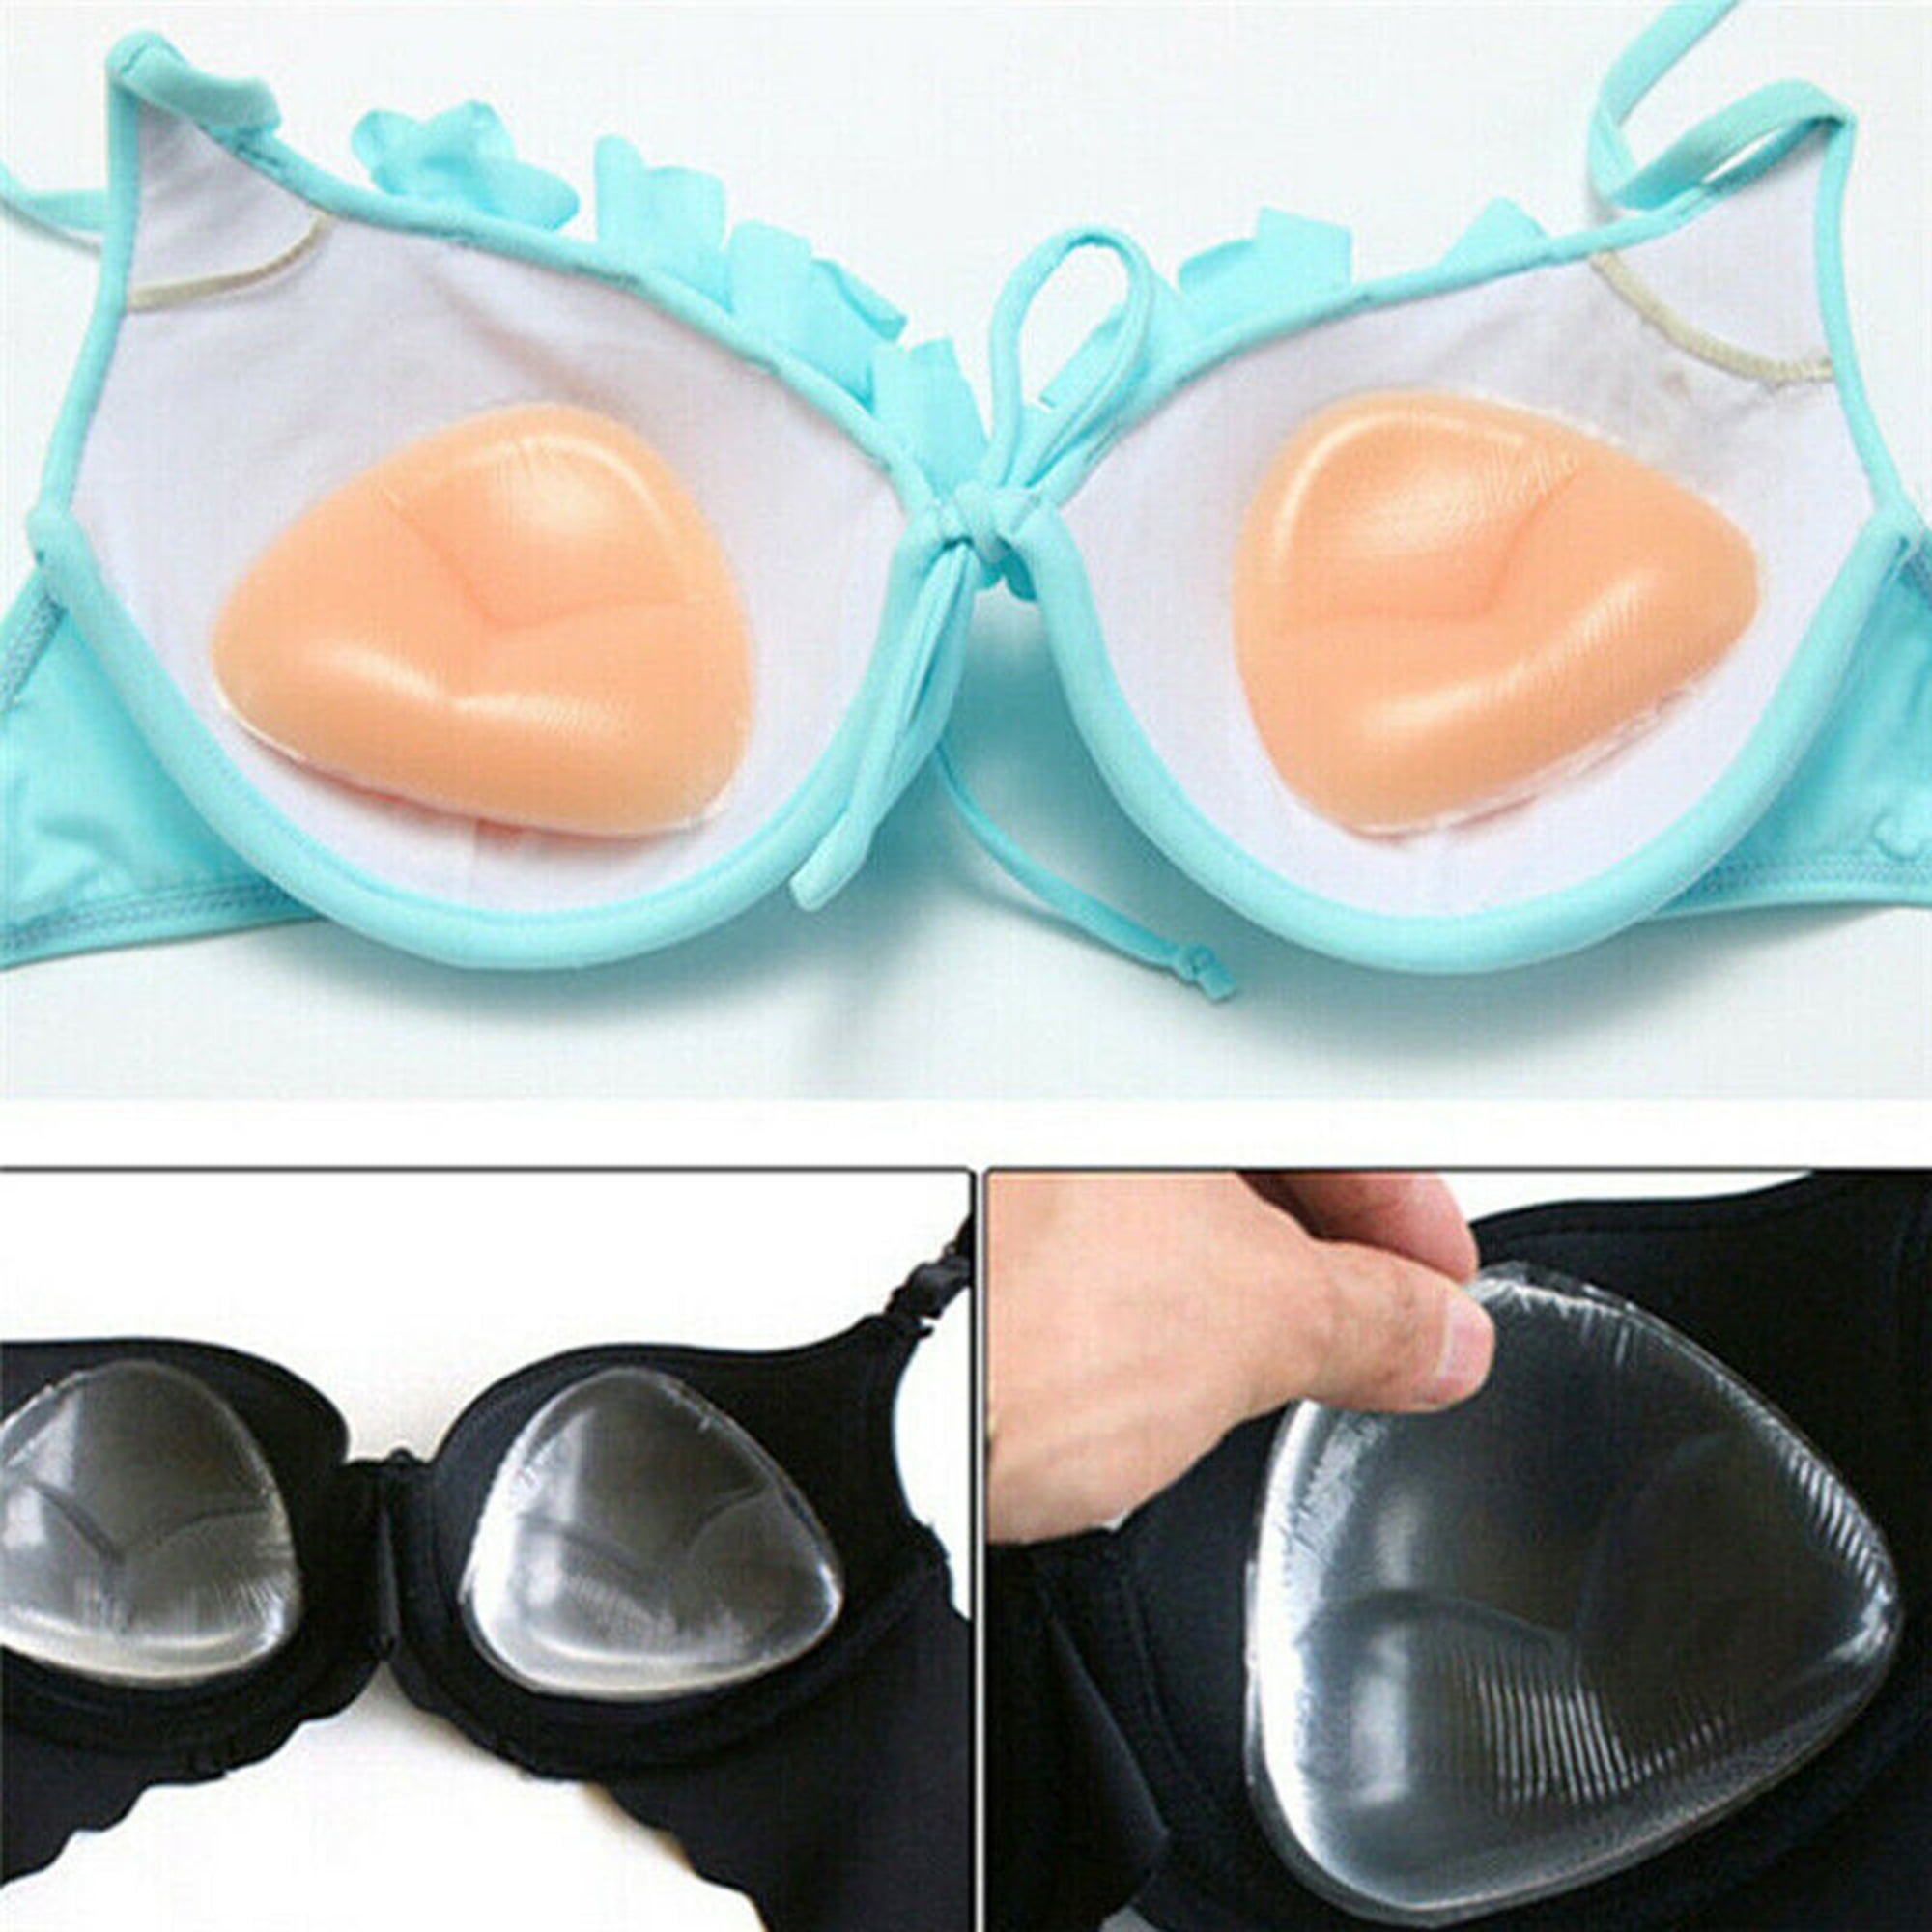  Mystiqueshapes Women Silicone Bra Cups Breast Magic  Enhancers/Inserts Chicken Cutlets free Travel Pouch (Large, Magic Boost  Pads-2 Sets) : Baby